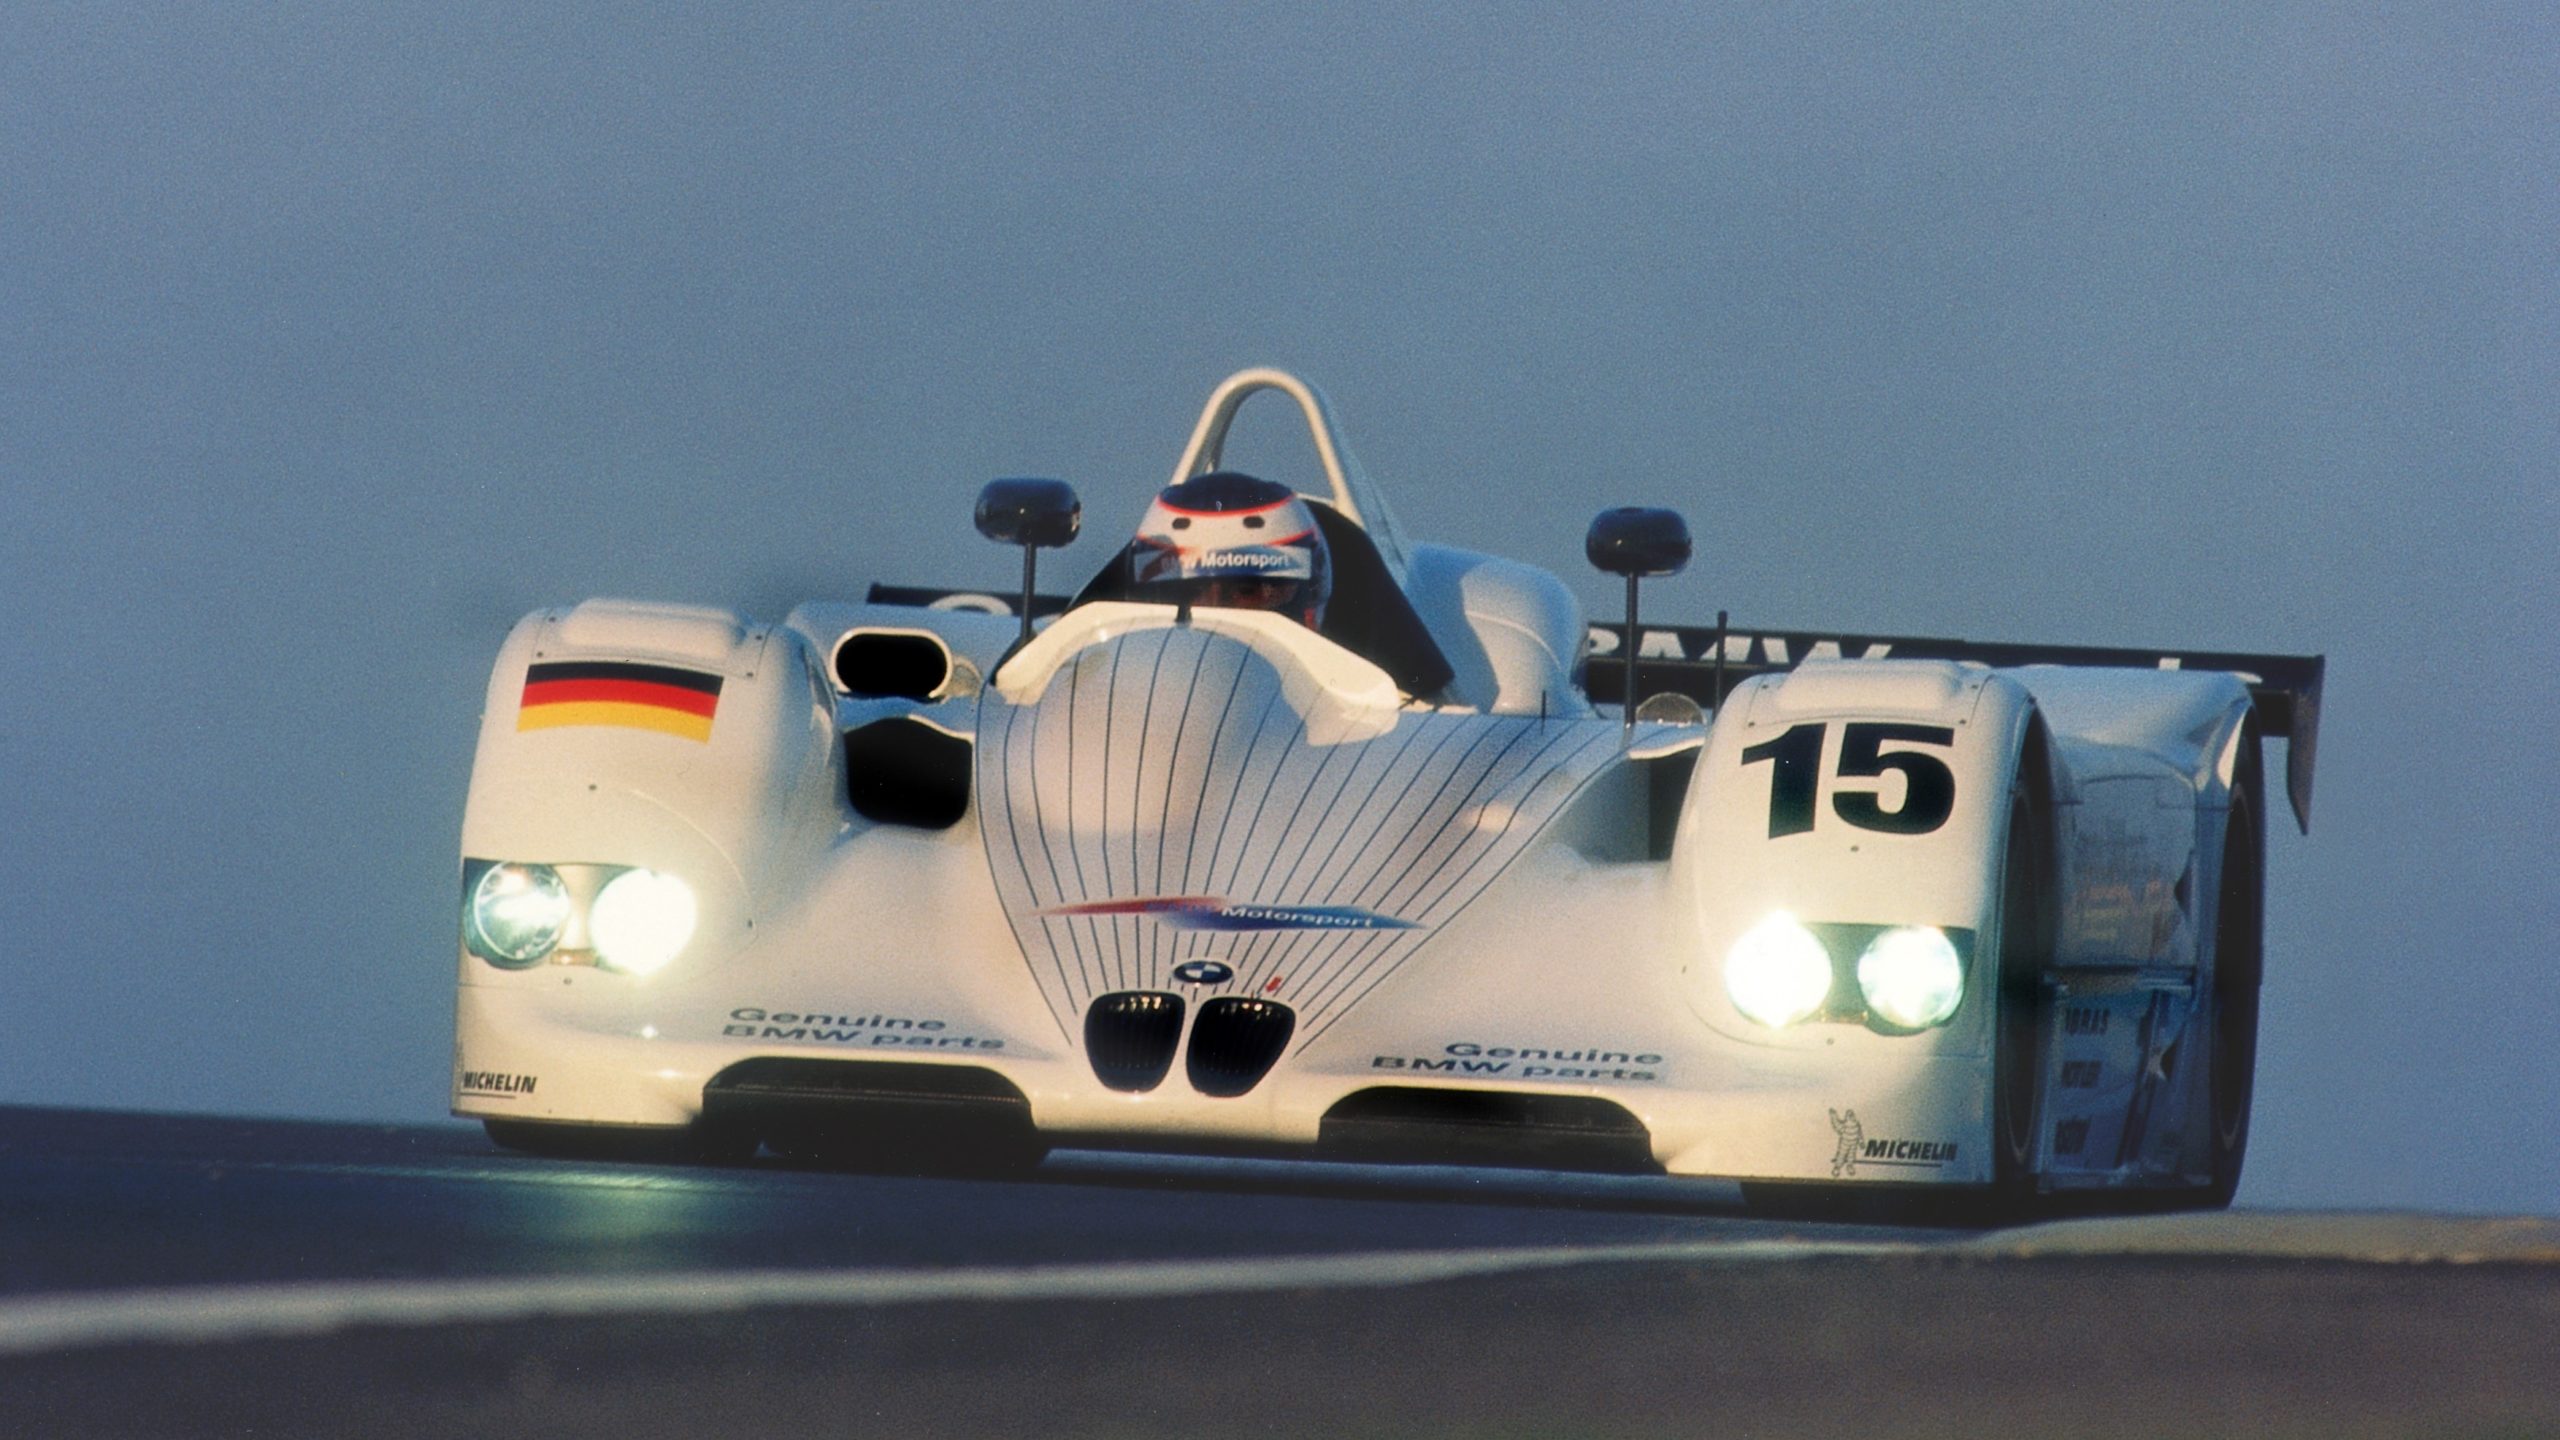 BMW in Le Mans